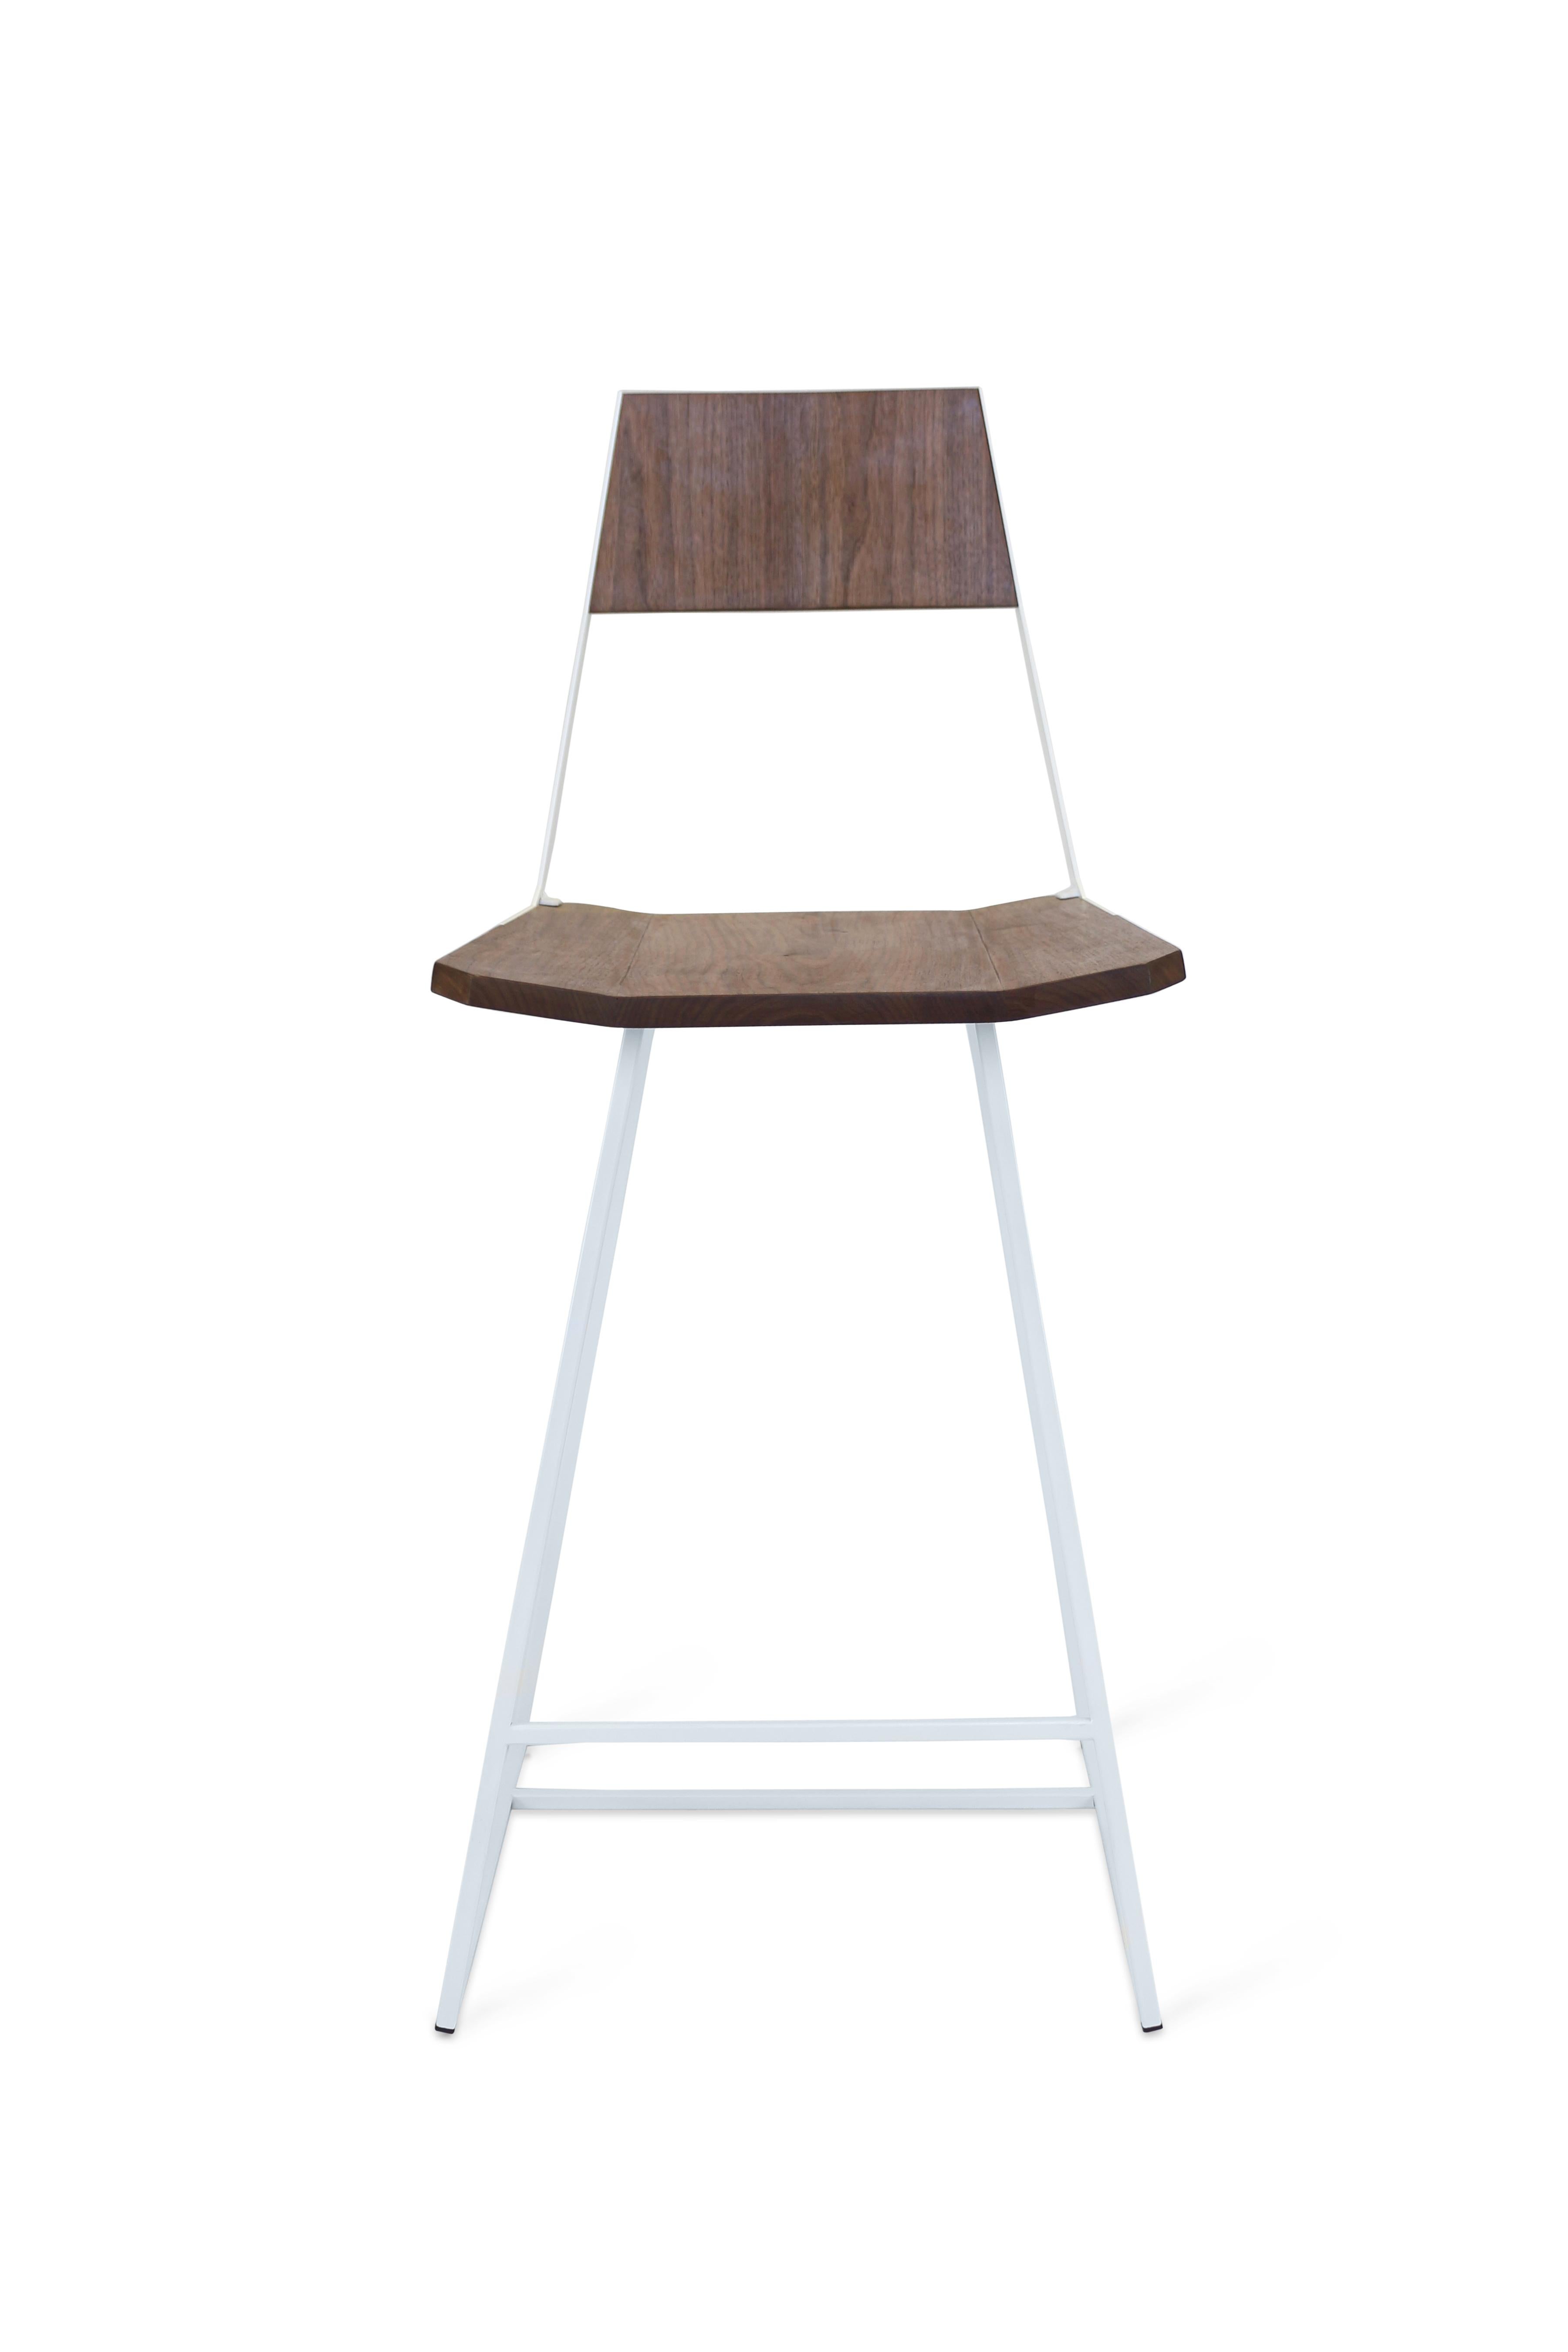 A perfect mix of Scandinavian inspiration and industrial flare that cohesively come together to make a statement piece which embodies simplicity, functionality and elegance.
 
The Clarkester is constructed of solid American Walnut wood (also